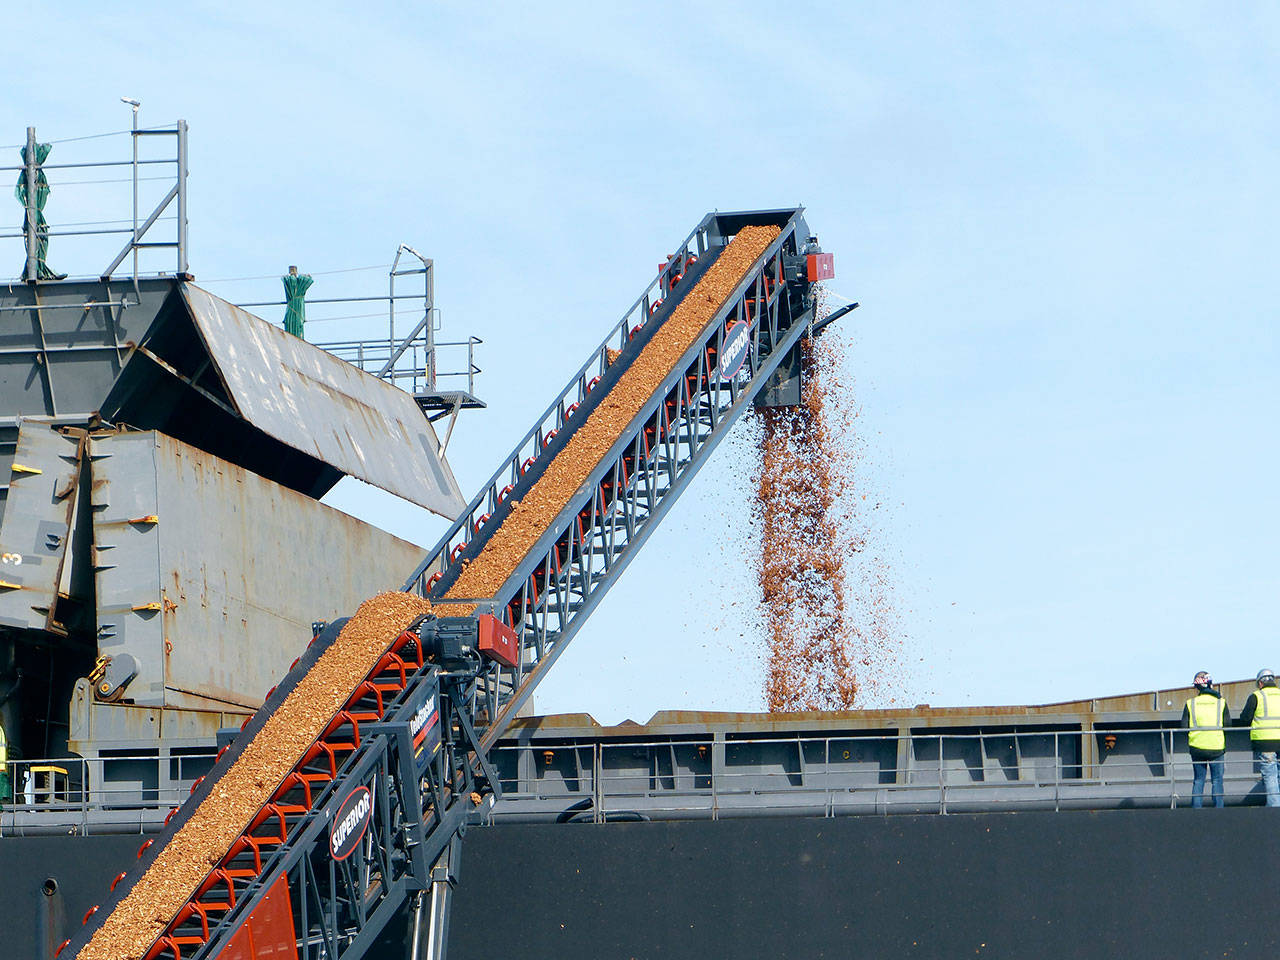 Wood chips are loaded into a hold on the Kutai Express by conveyor. (David G. Sellars/for Peninsula Daily News)